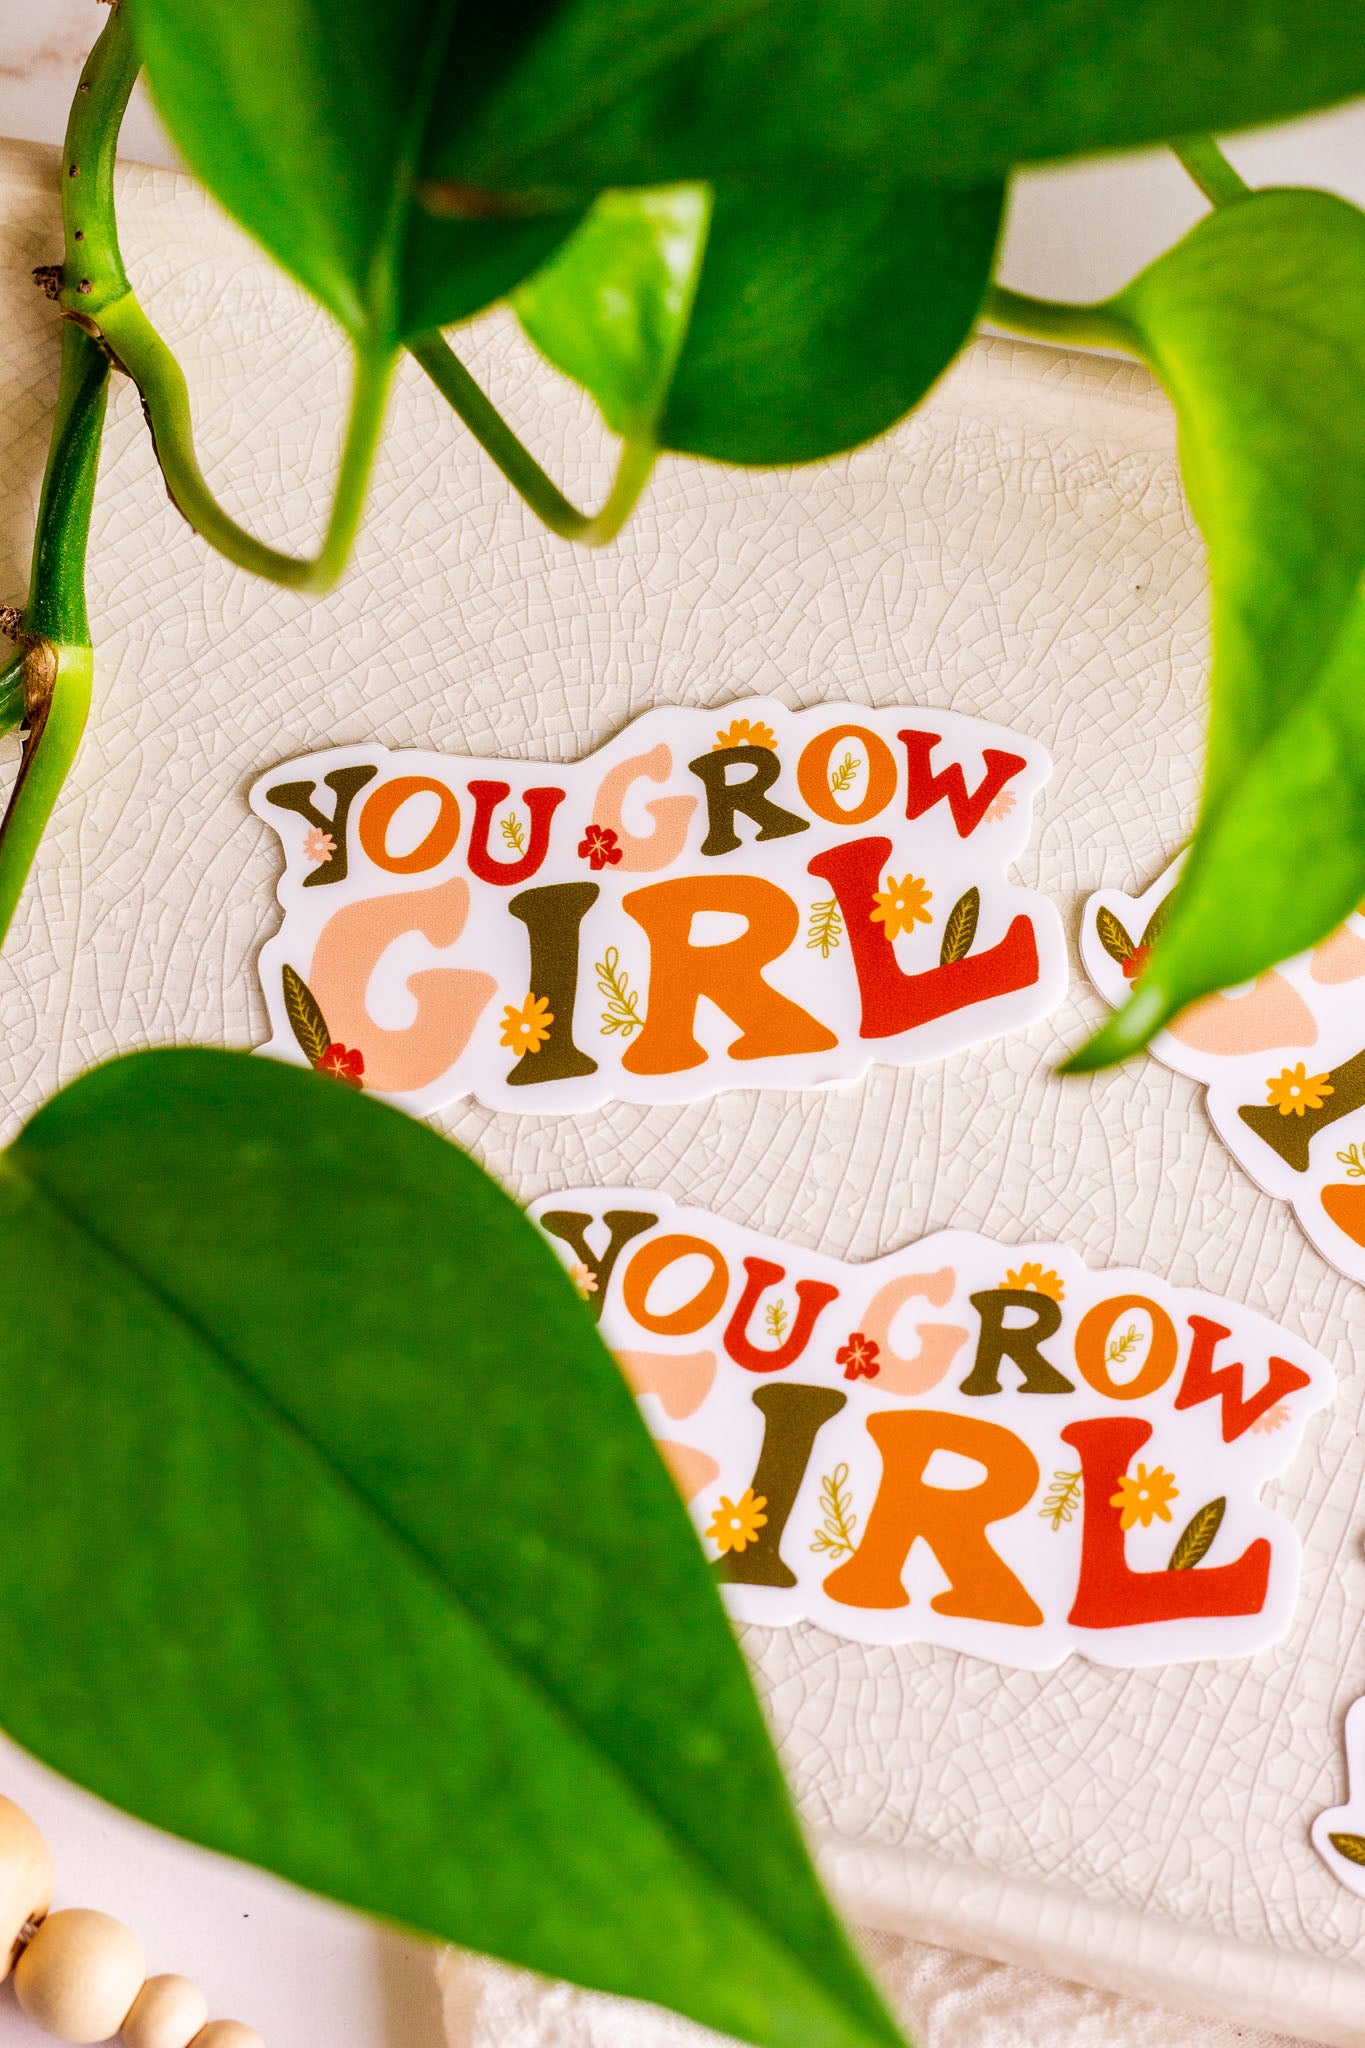 Load image into Gallery viewer, You Grow Girl Vinyl Sticker laying on a decorative tray with greenery surrounding it
